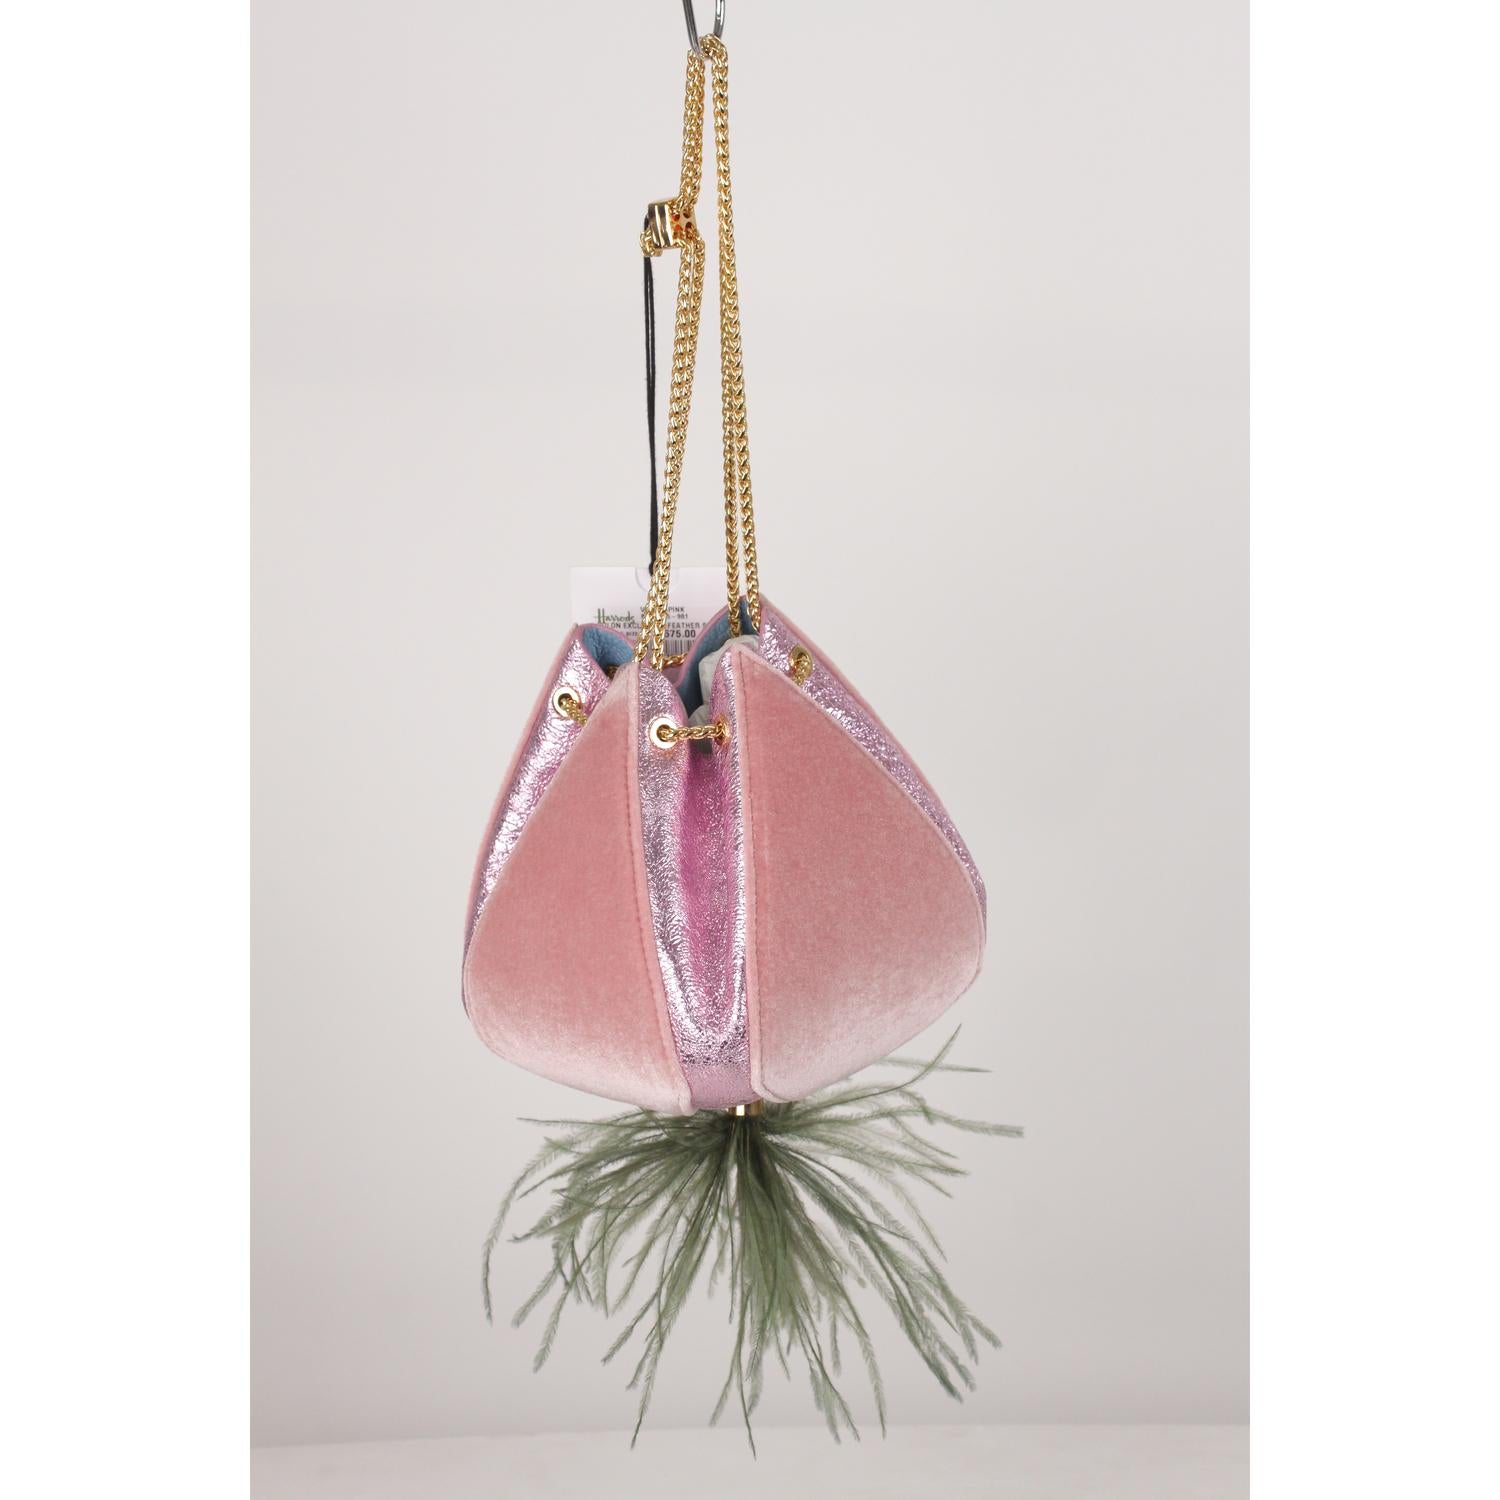 Beautiful THE VOLON 'Cindy' evening bag in pink velvet with metallic Pink textured leather. Inspired by Cinderella's pumpkin carriage, the bag features gray ostrich feather detail on the bottom. Gold metal double adjustable shoulder chain strap.